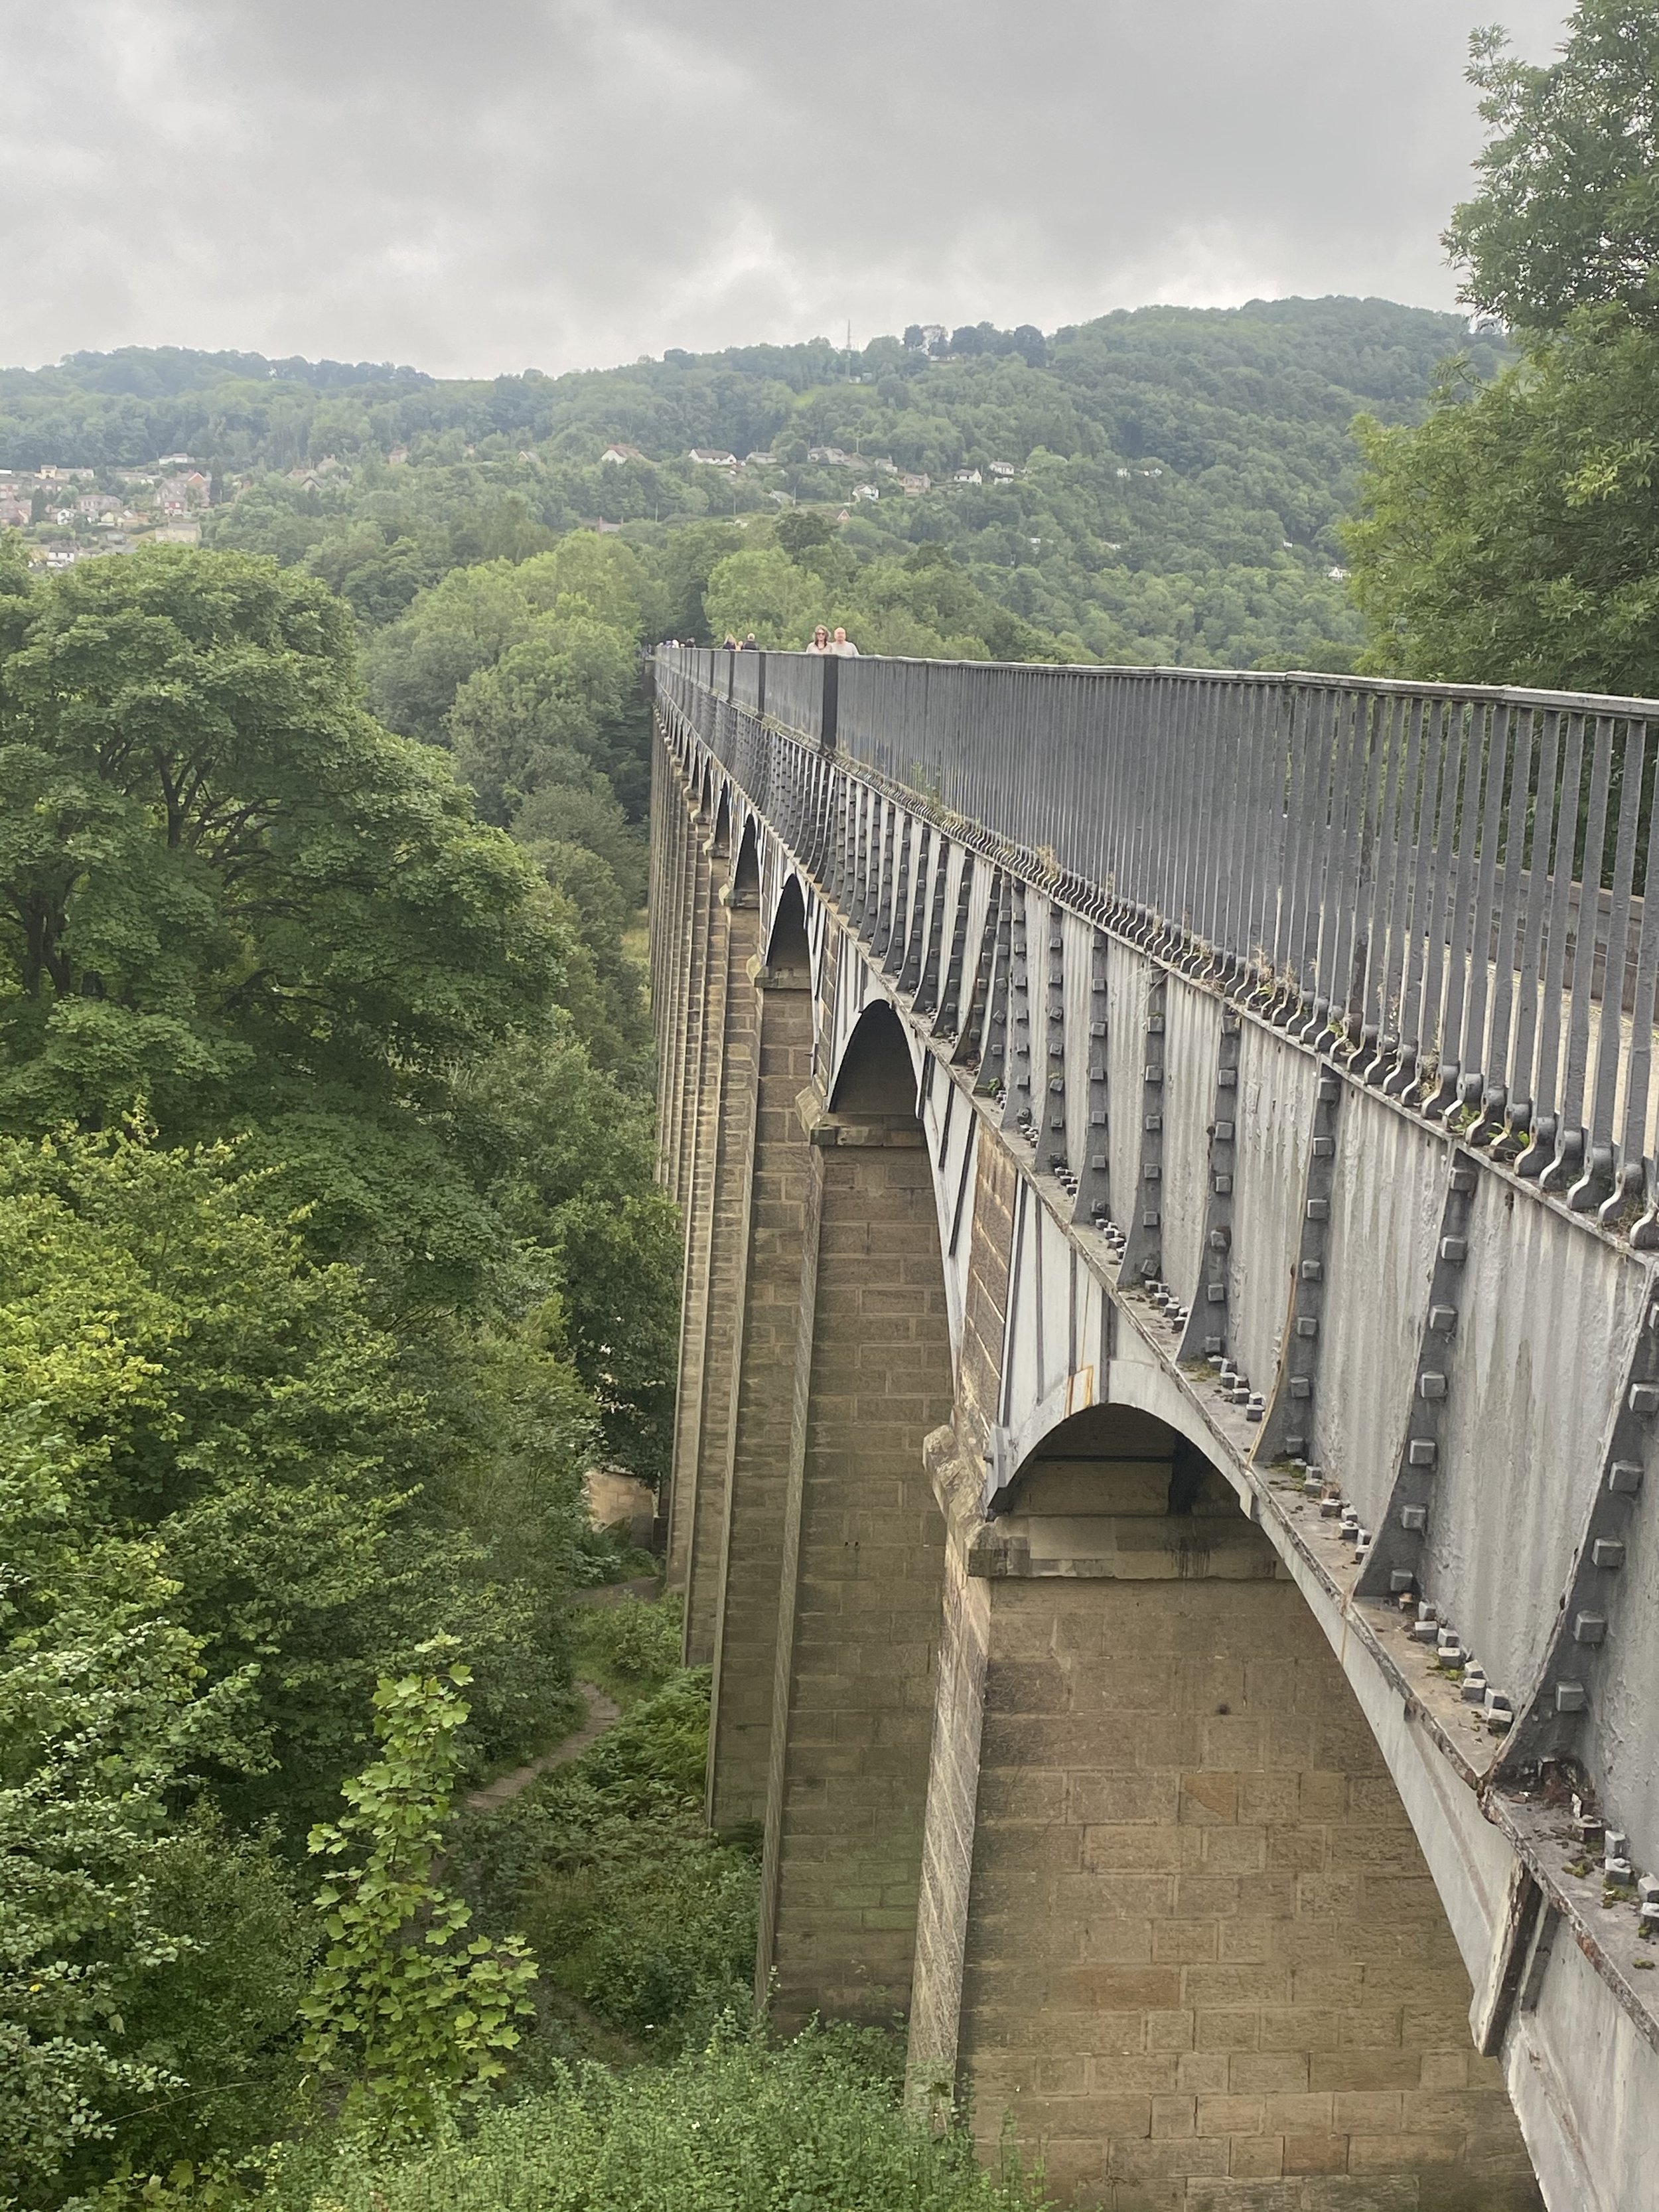  Bet you can’t say this one! Carefully traversing the narrow path over the Pontcysyllte Aqueduct.  